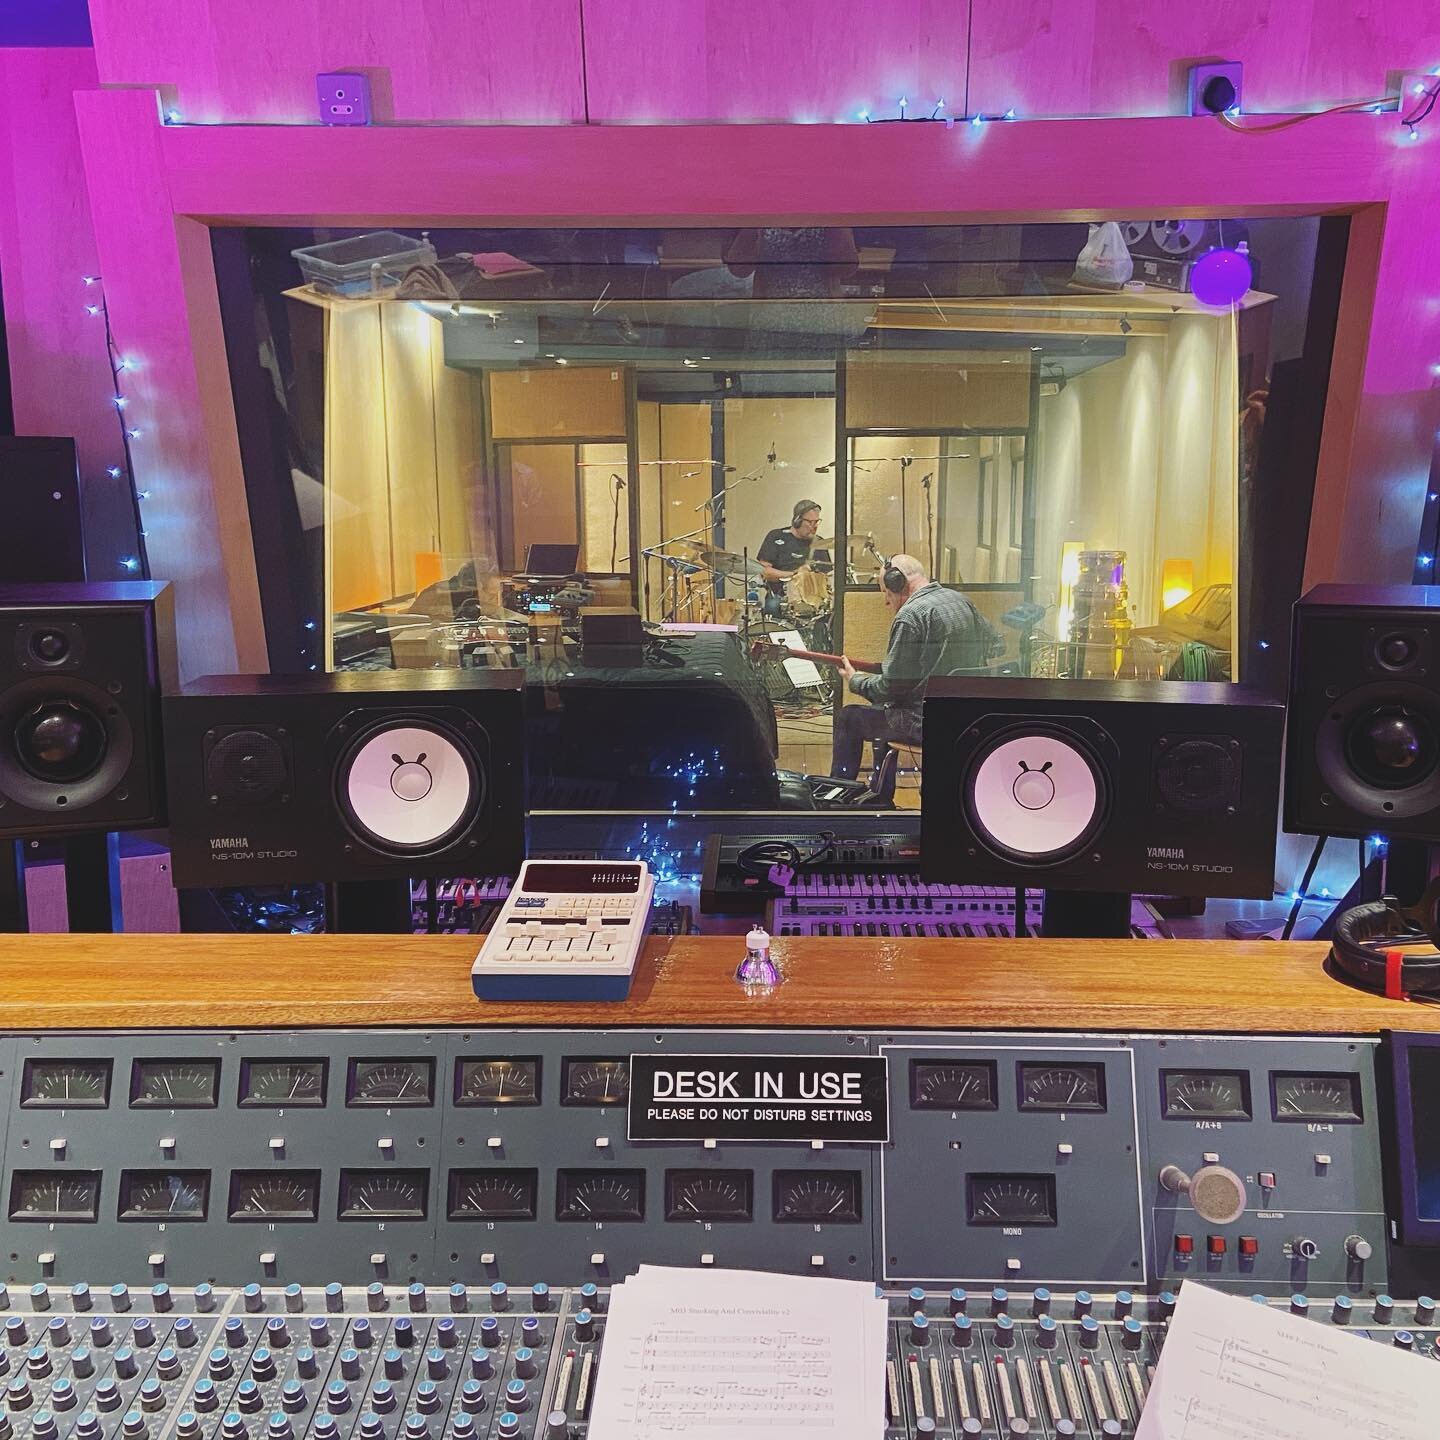 DESK IN USE!
Such a lovely Sunday back @snapstudios with great tunes and the best people 😍
Music by Stephen Warbeck and Lewis Morison played by John Parricelli, Ian Thomas and Tim Harries. Thanks as ever to the brilliant @billy.foster for looking af